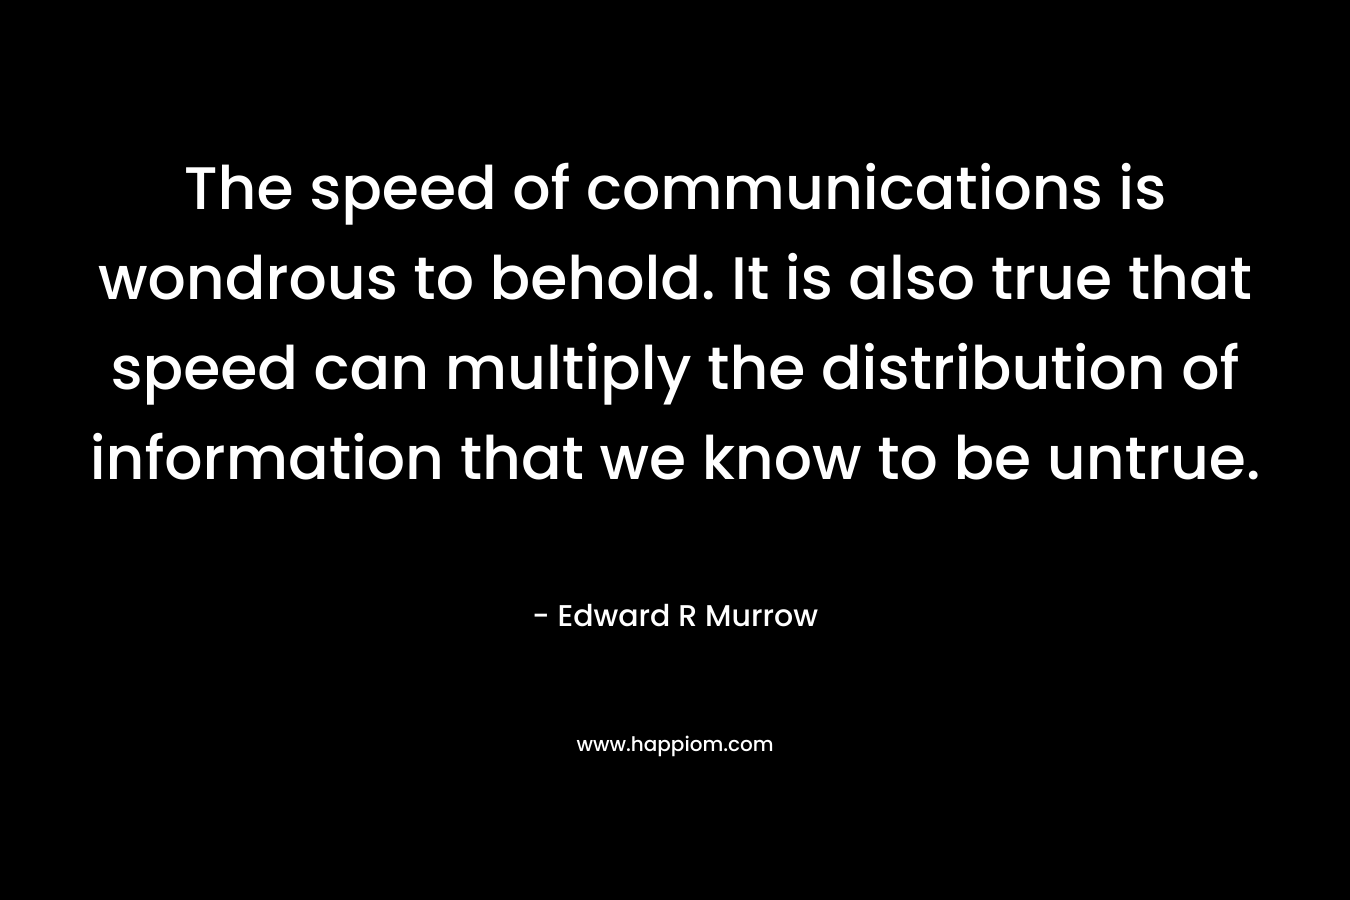 The speed of communications is wondrous to behold. It is also true that speed can multiply the distribution of information that we know to be untrue. – Edward R Murrow